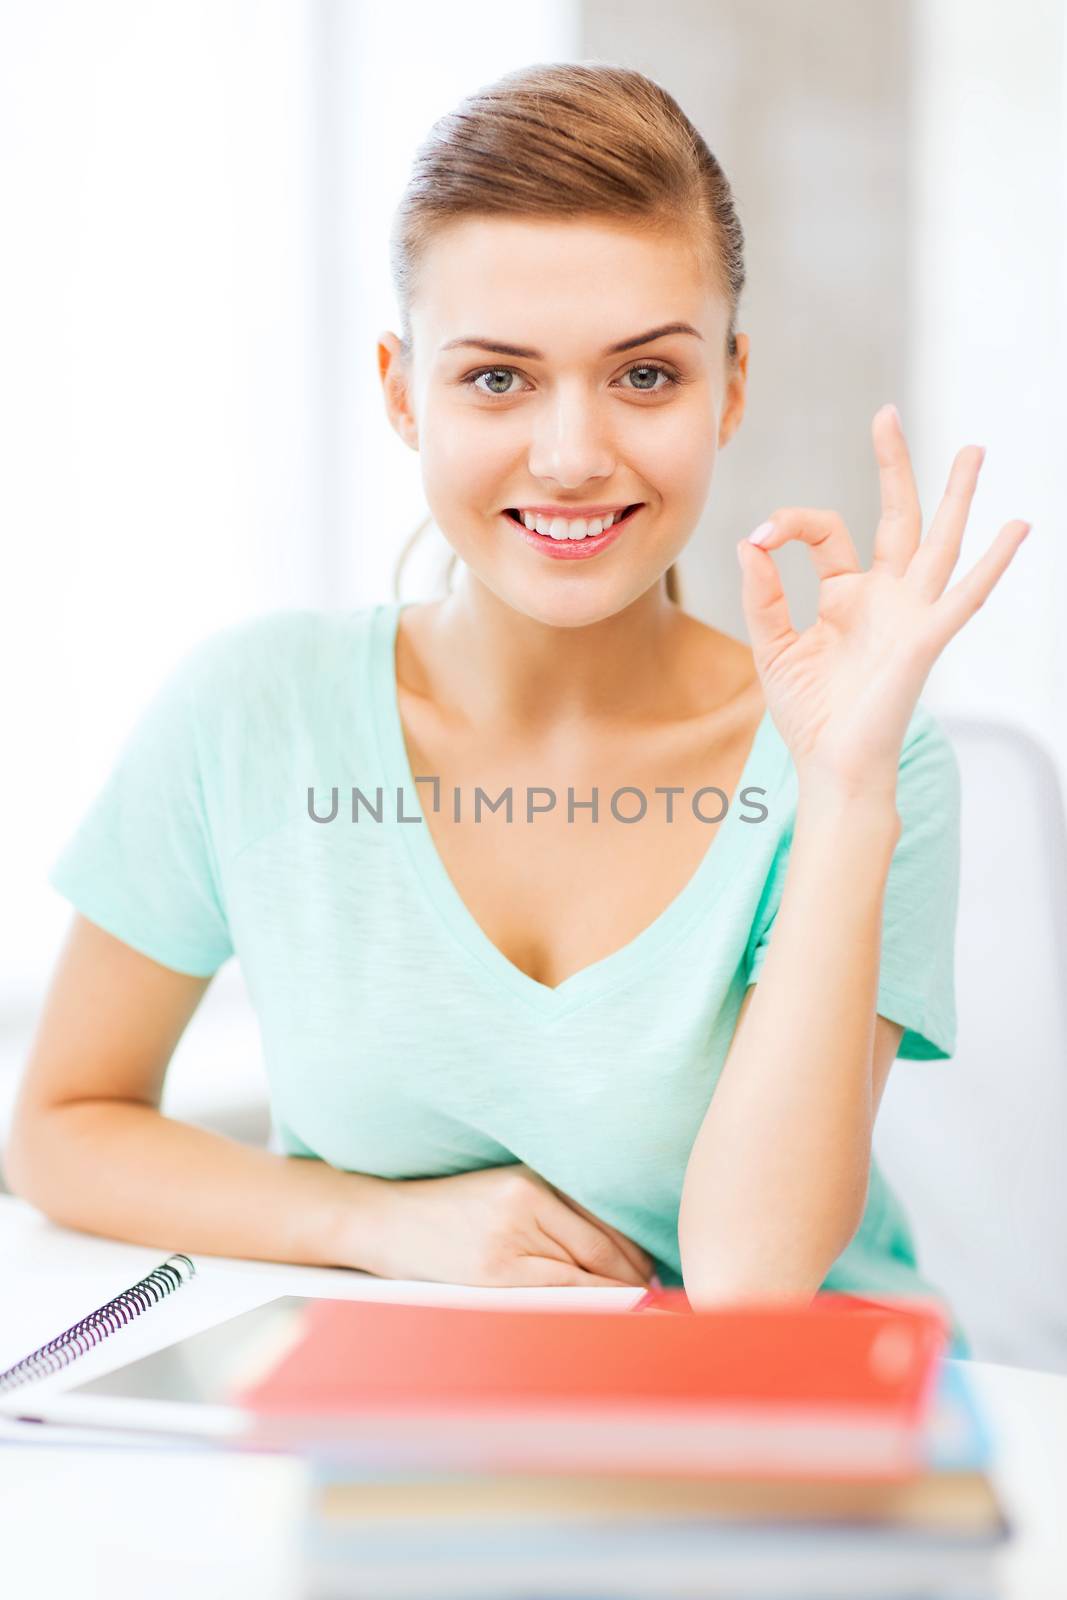 education, technology and internet concept - smiling student girl with tablet pc